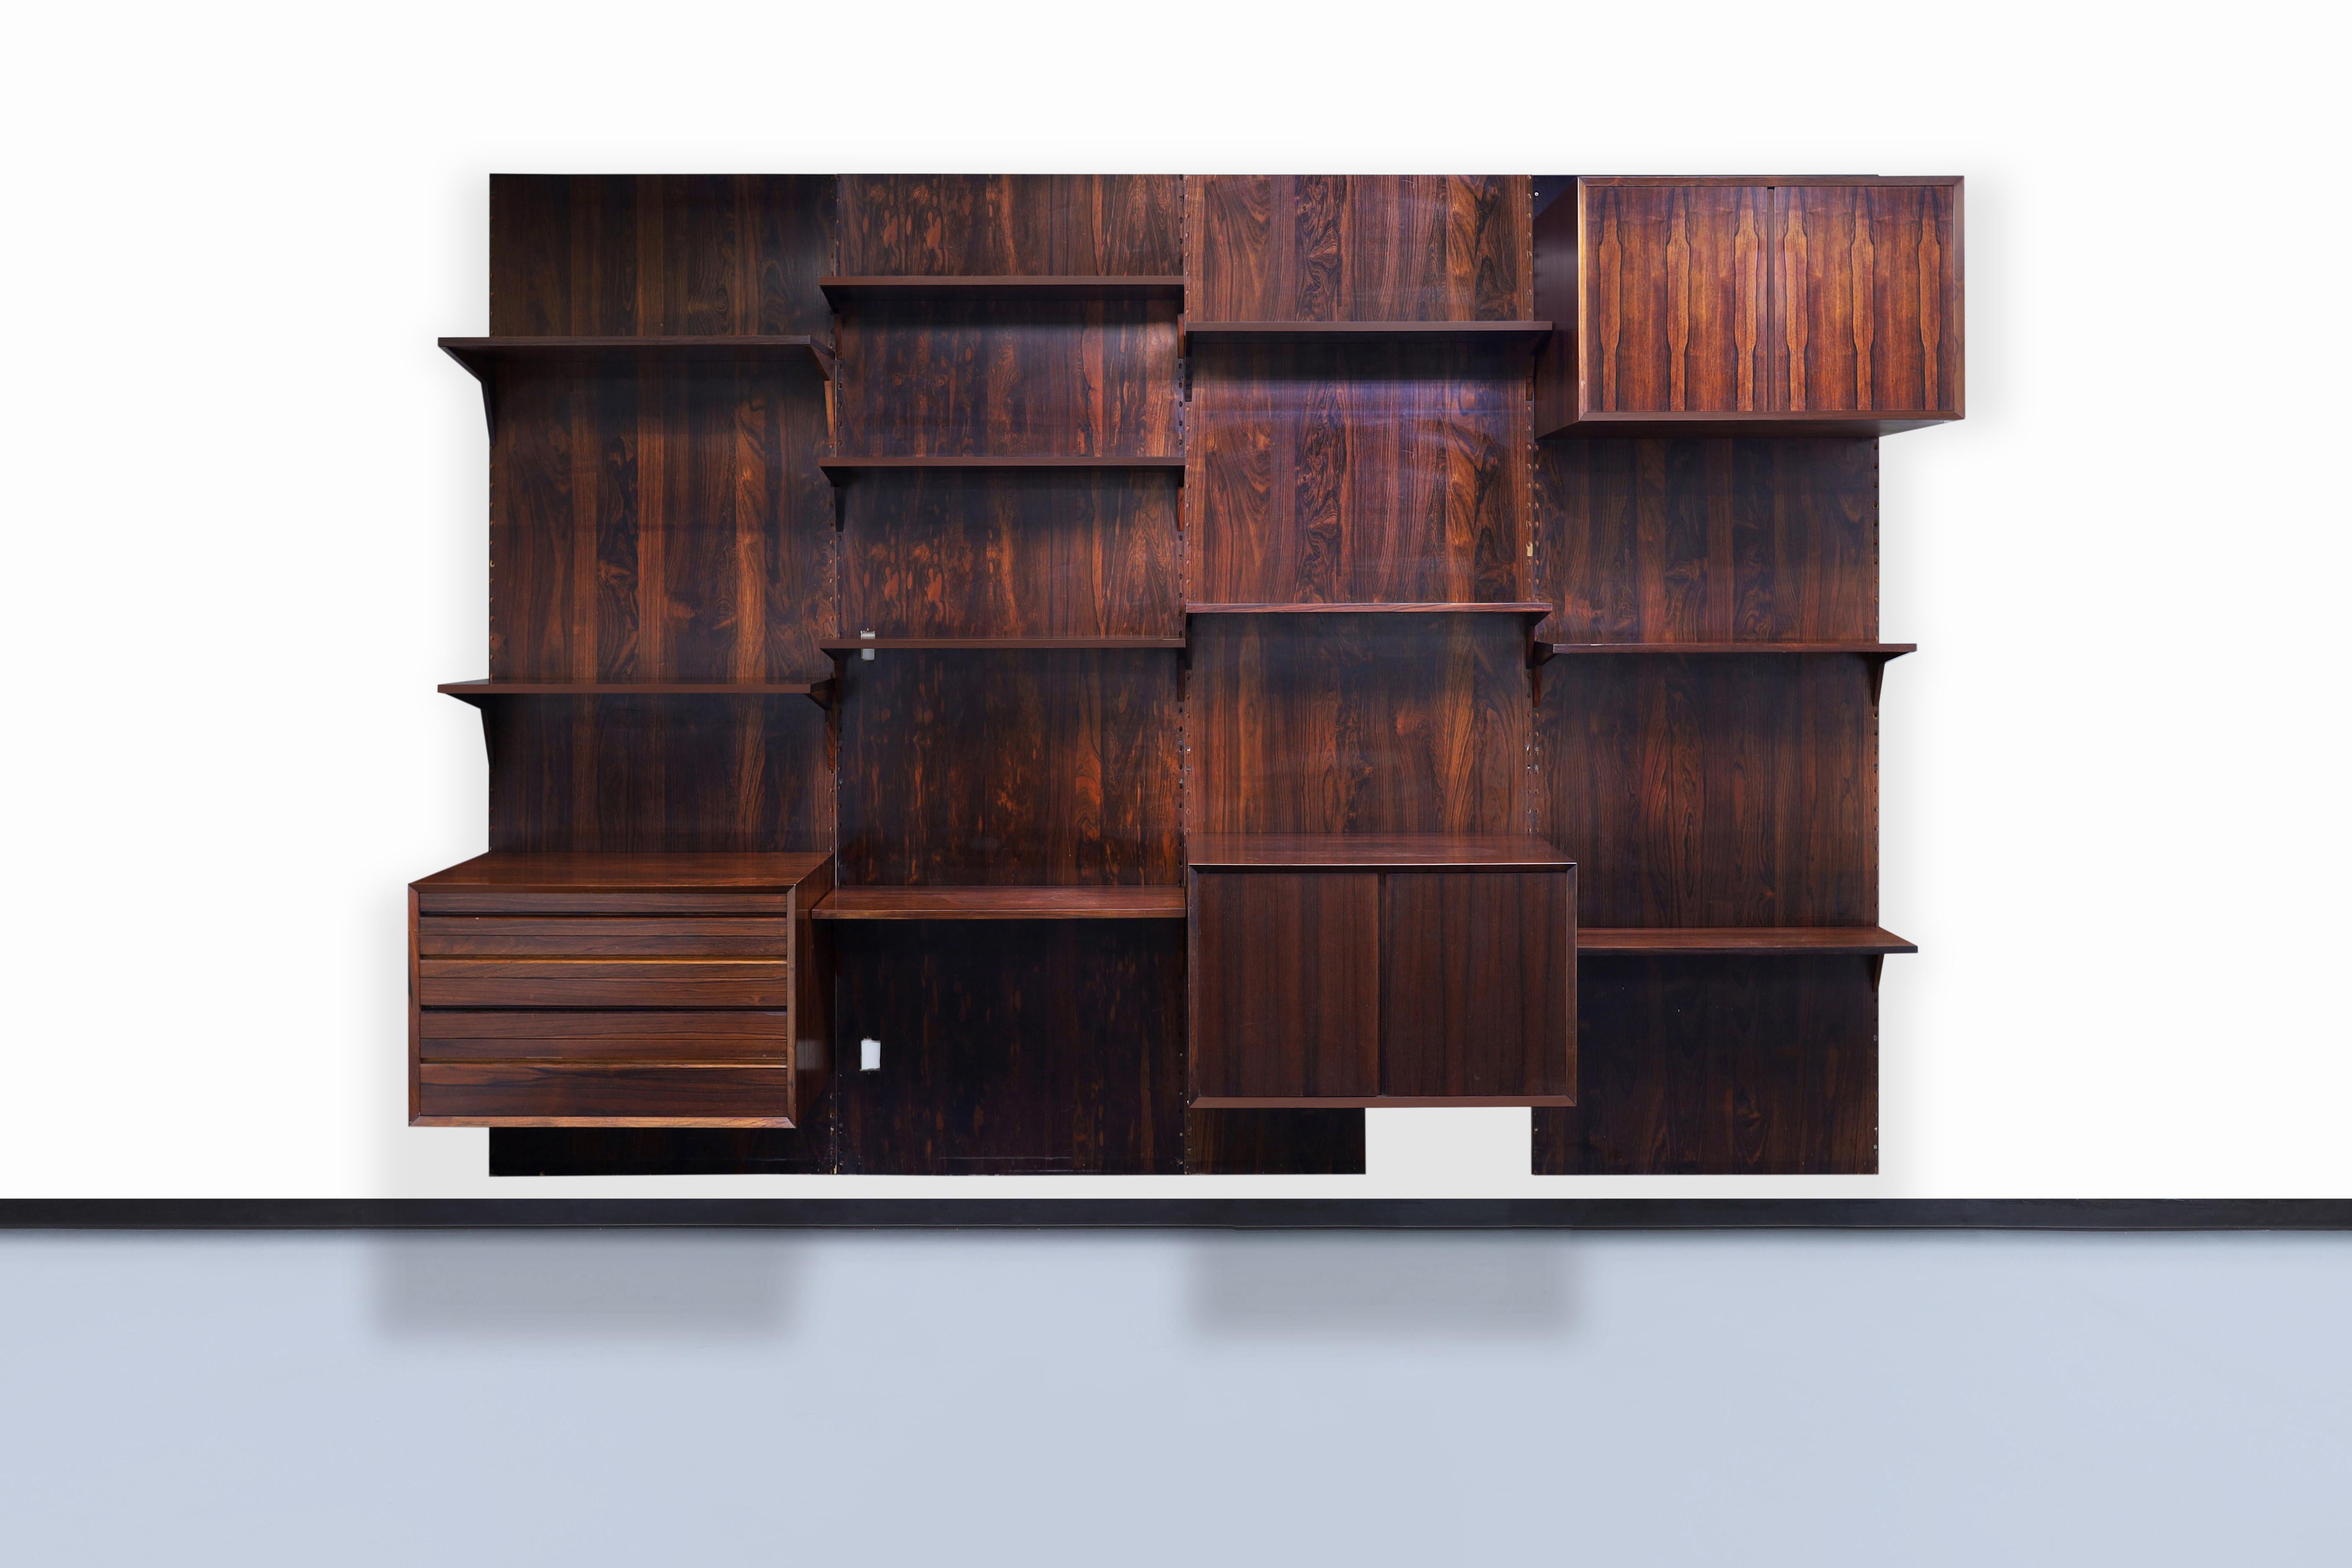 Exceptional Danish modern Brazilian rosewood wall unit by Poul Cadovius for Cado in Denmark, circa 1960s. This wall unit has been constructed from the highest quality Brazilian rosewood, and thanks to the wood's grains, it gives the structure